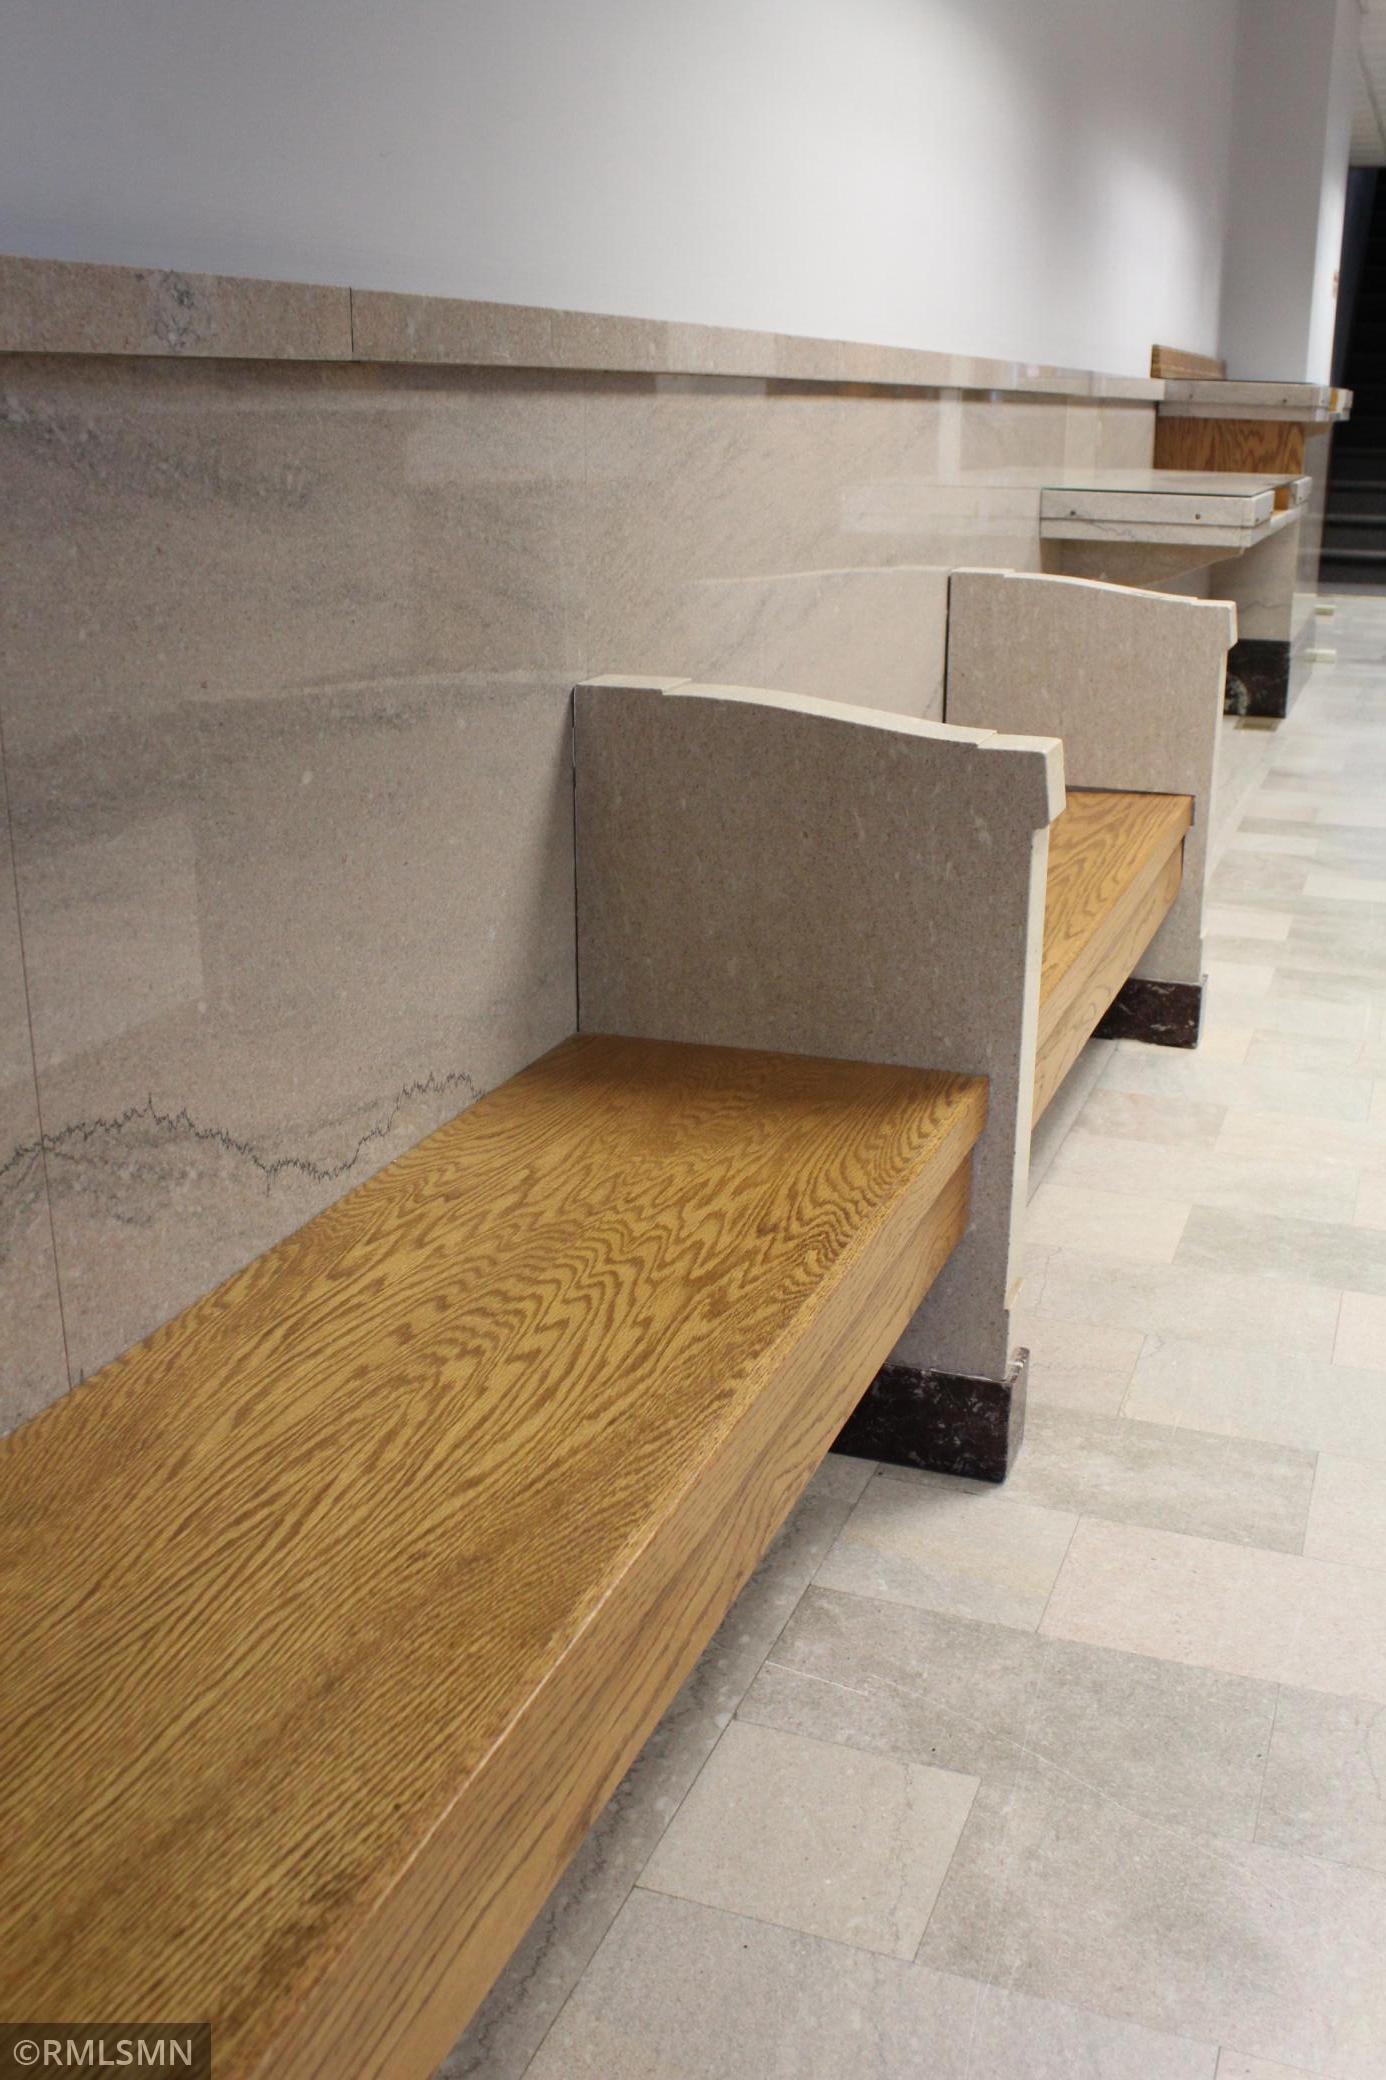 Built-in Benches with stone wall paneling and stone flooring